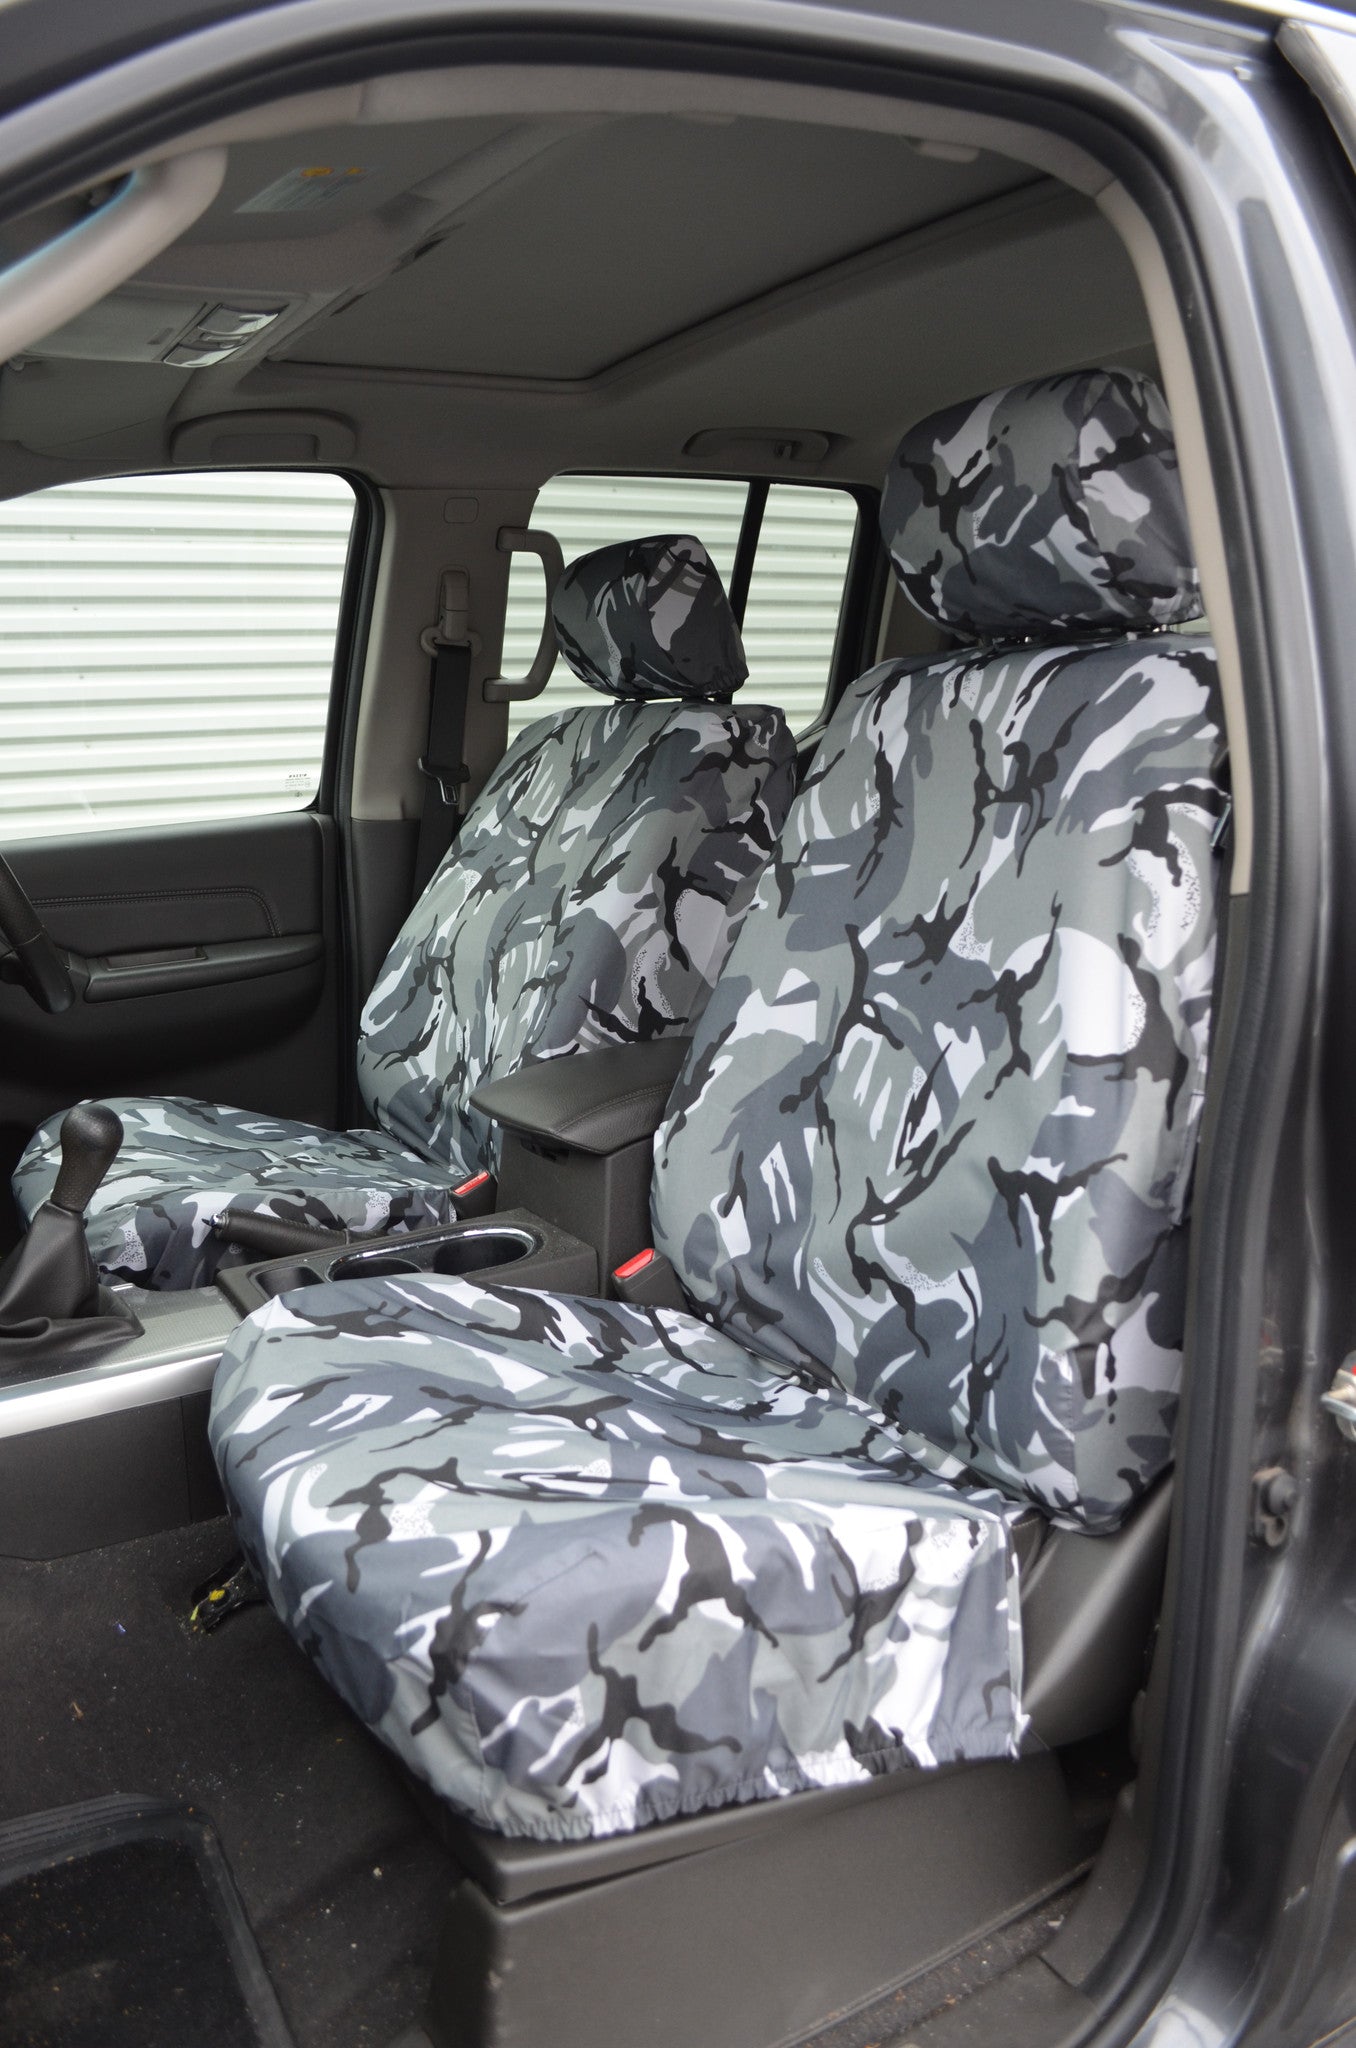 Nissan Navara Double Cab (2005 to 2016) Tailored Seat Covers Front Seats / Urban Camouflage Turtle Covers Ltd